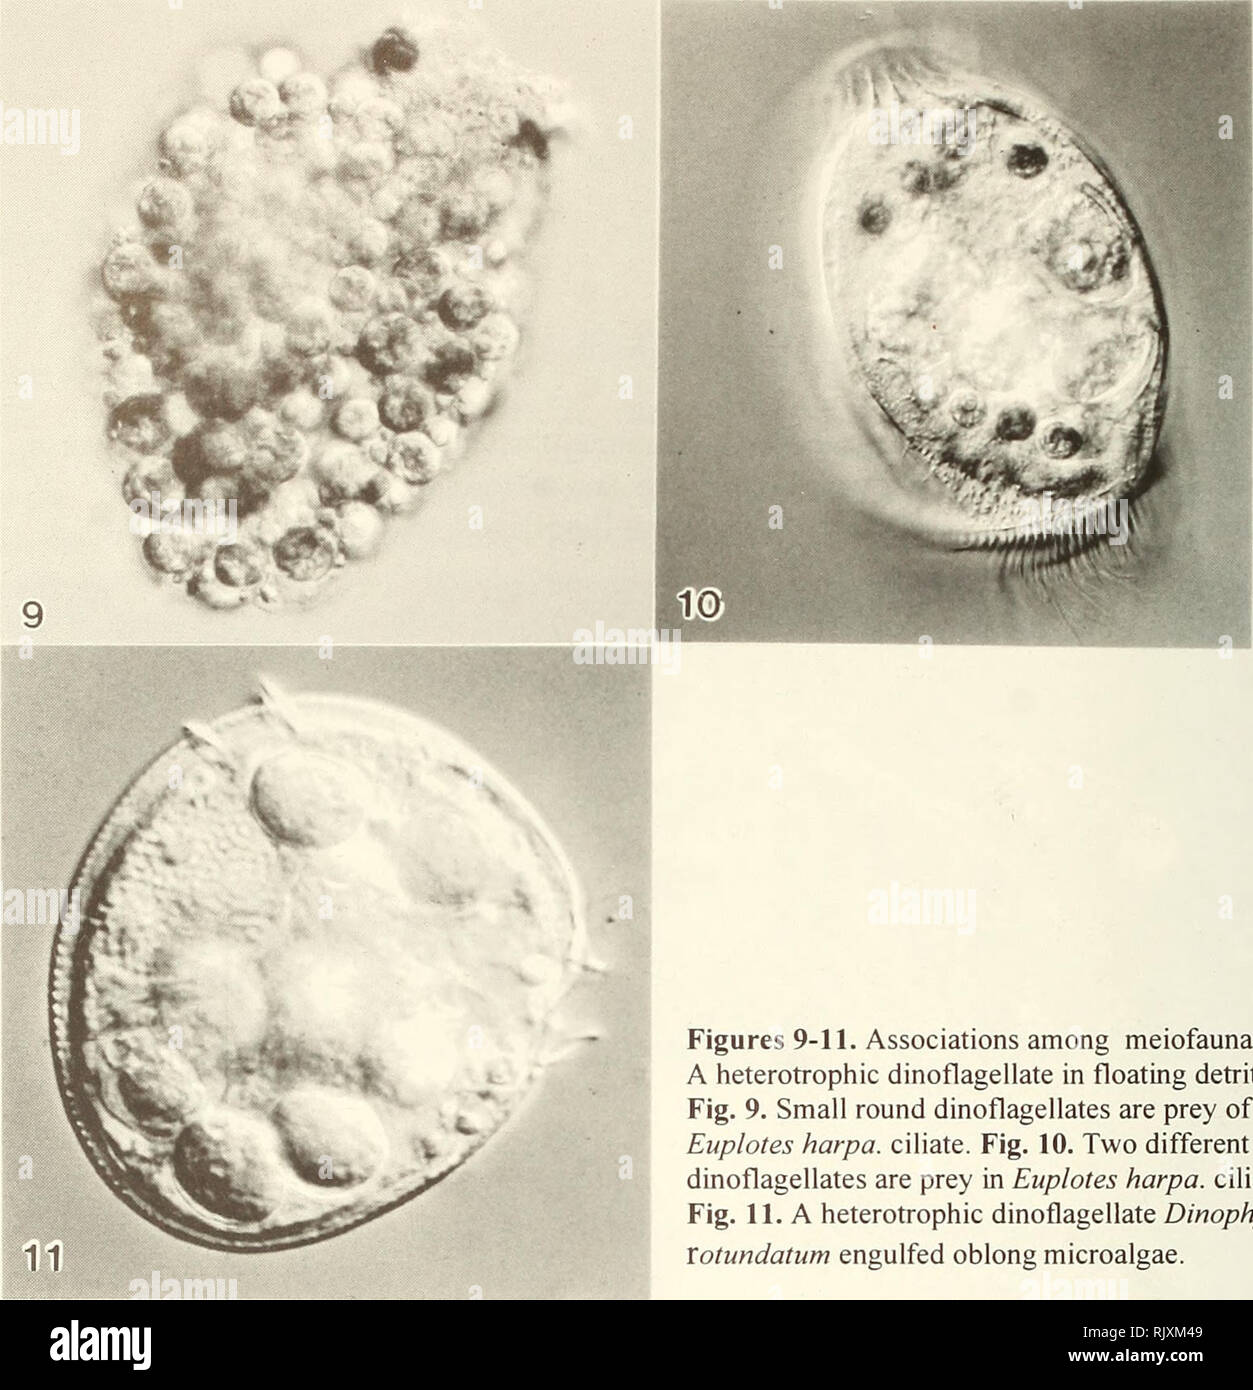 . Atoll research bulletin. Coral reefs and islands; Marine biology; Marine sciences. Figures 9-11. Associations among meiofauna and A heterotrophic dinoflagellate in floating detritus. Fig. 9. Small round dinoflagellates are prey of an Euplotes harpa. ciliate. Fig. 10. Two different sized dinoflagellates are prey in Euplotes harpa. ciliate. Fig. 11. A heterotrophic dinoflagellate Dinophysis Votundatum engulfed oblong microalgae. Examples of dinoflagellates as prey of ciliates and heterotrophic dinoflagellates in floating detritus are in the following light micrographs illustrated at 400x magni Stock Photo